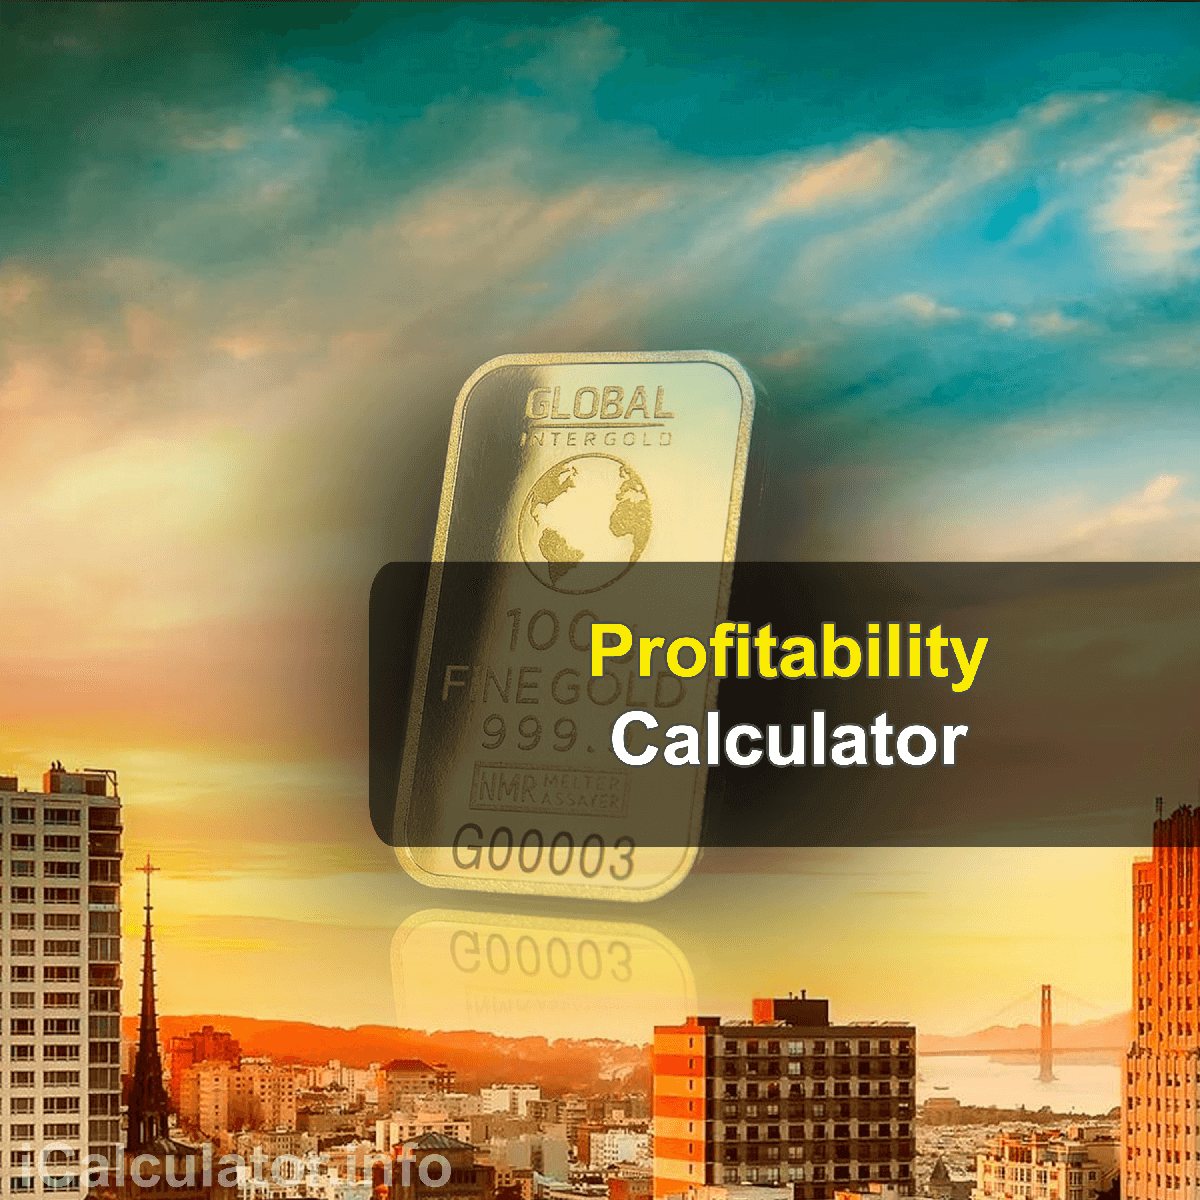 Profit Calculator. This image provides details of how to calculate profit using a calculator and notepad. By using the profit formula, Profit Calculator provides a true calculation of the profit that is earned by your business related to its revenue